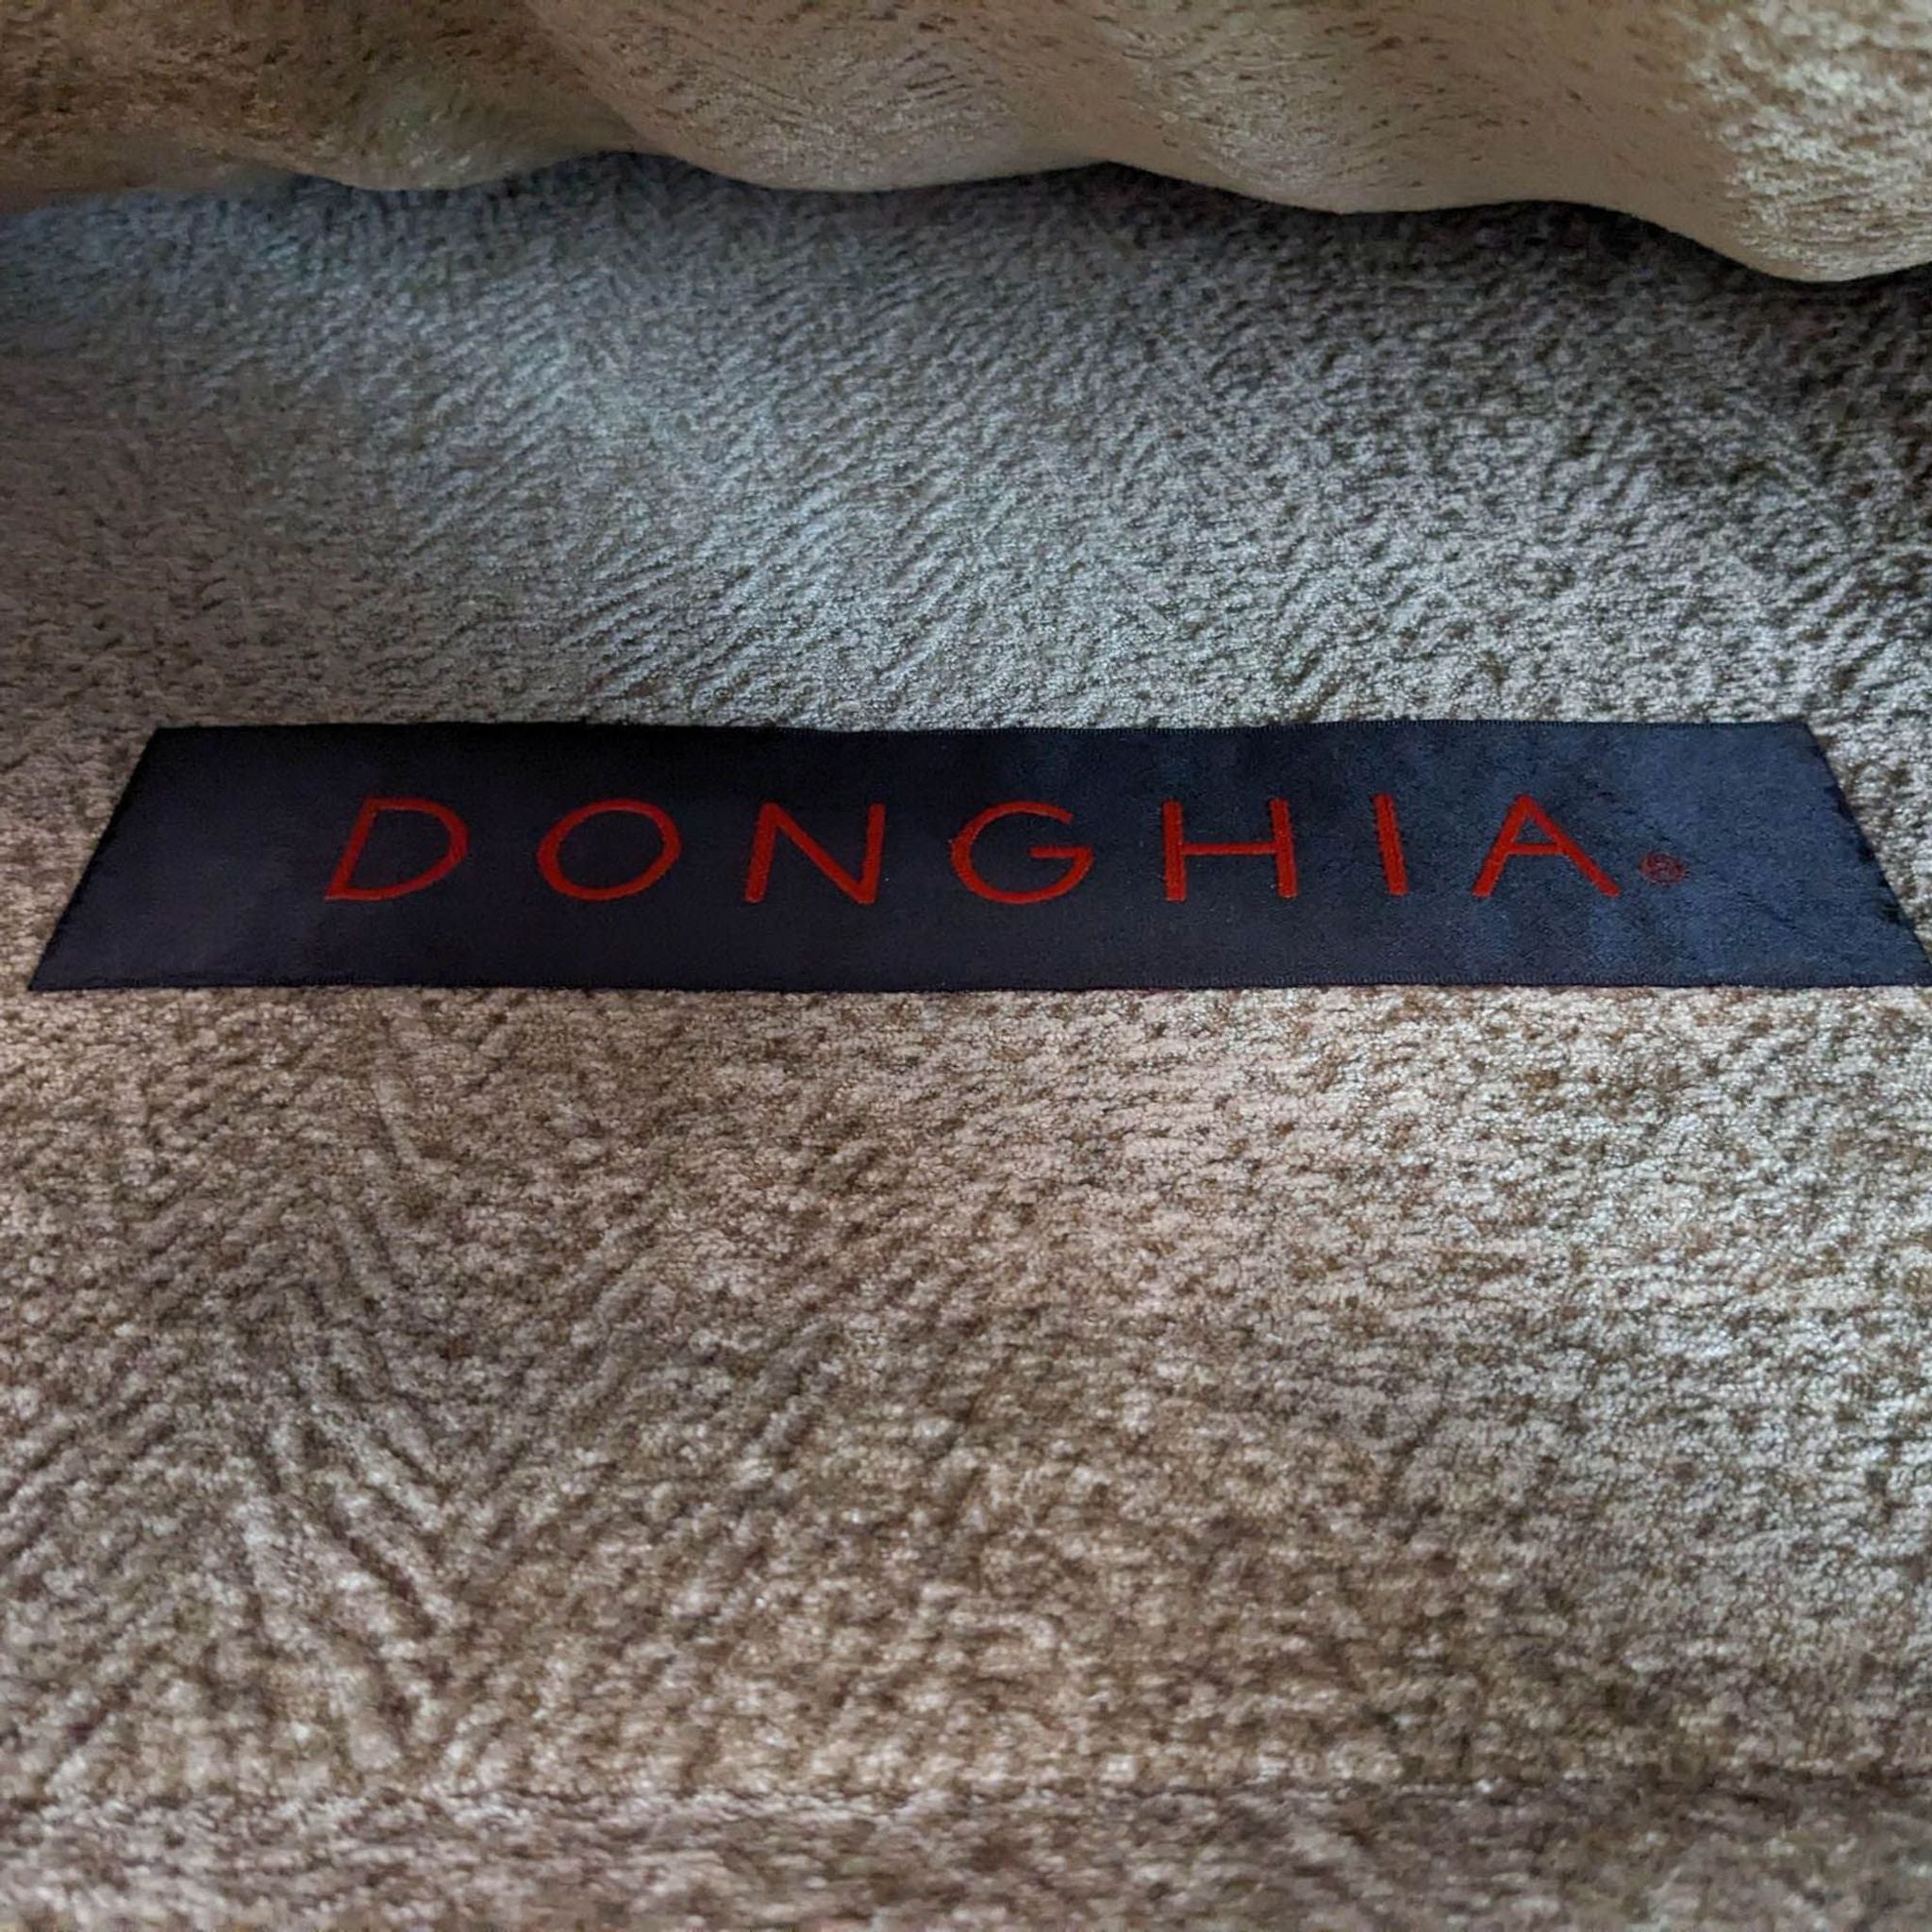 Close-up of Donghia brand label on beige fabric upholstery of a high-end daybed.